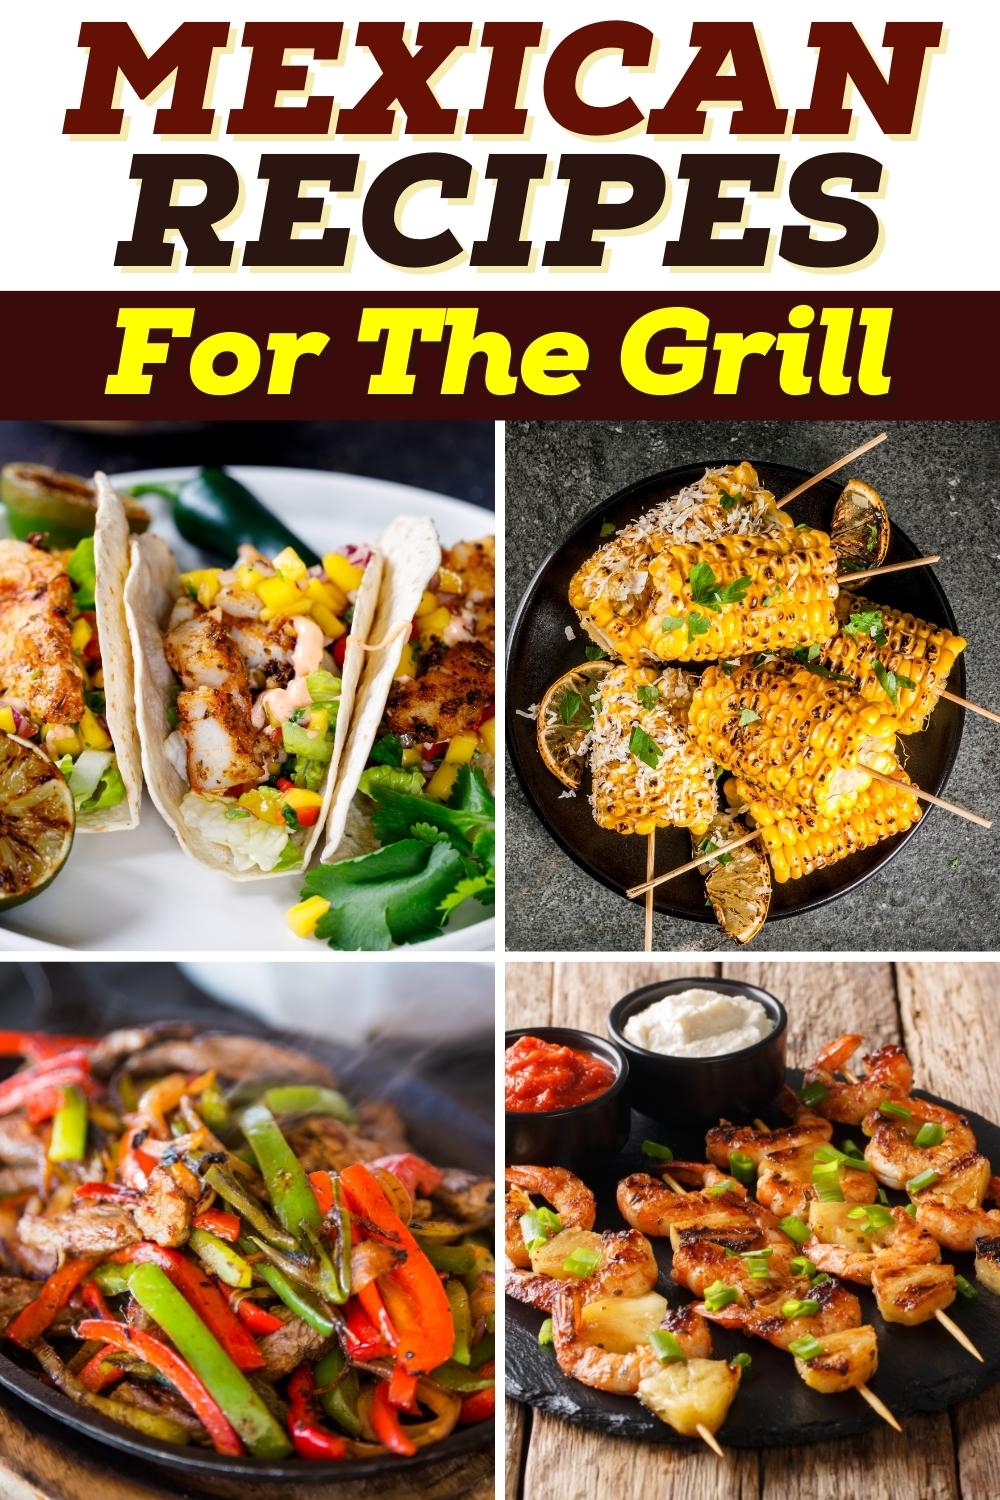 Mexican Recipes for the Grill